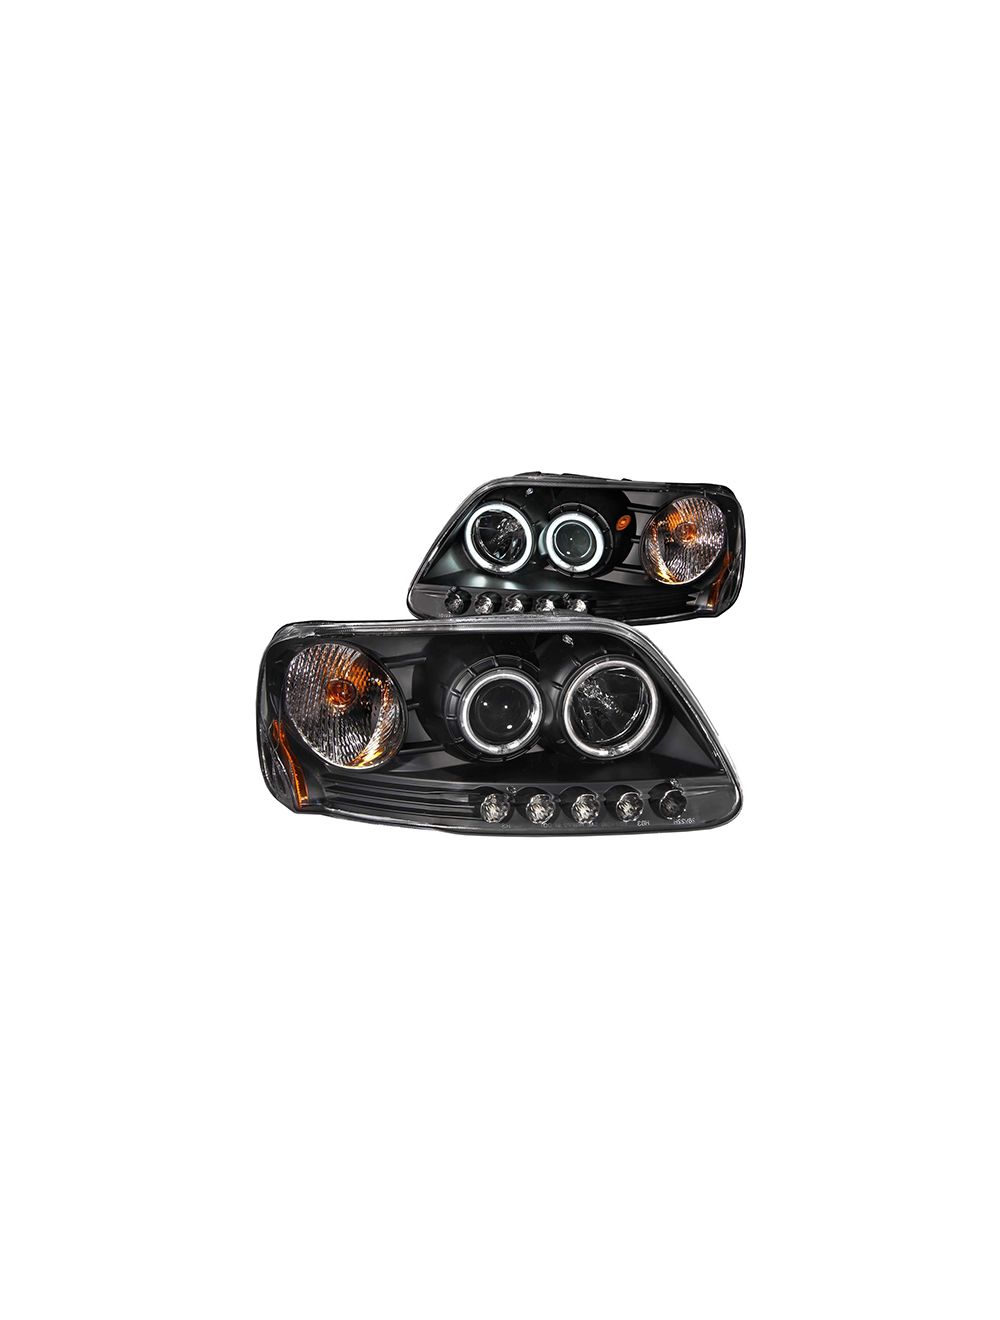 Anzo ANZ111097 Black Clear Projector with Halos Headlights for Ford 1997 - 2003 F150